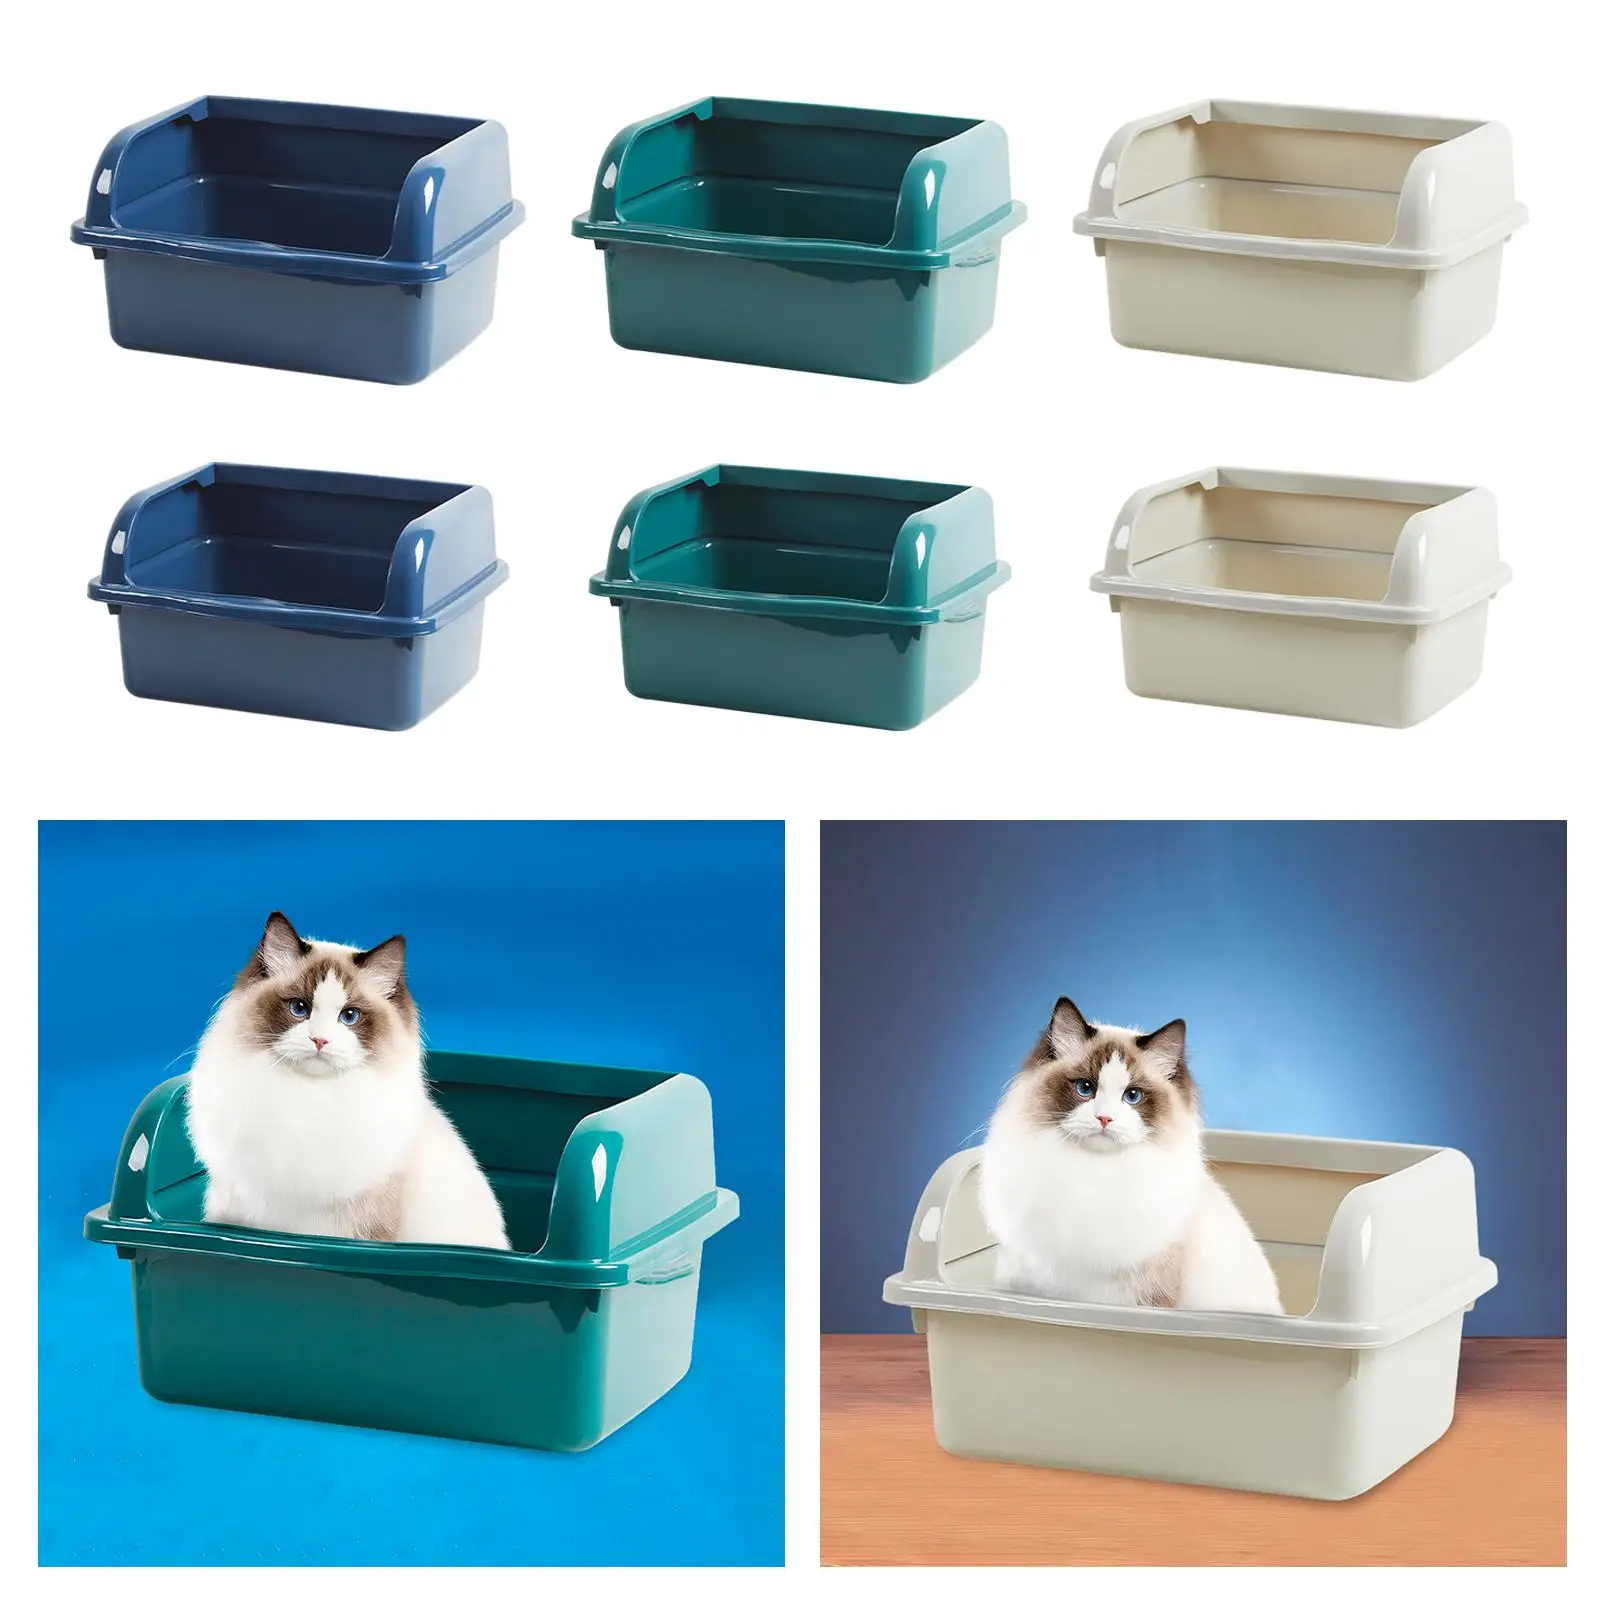 Open Top Pet Litter Tray Cat Litter Box with High Side U Shape Lowered Front